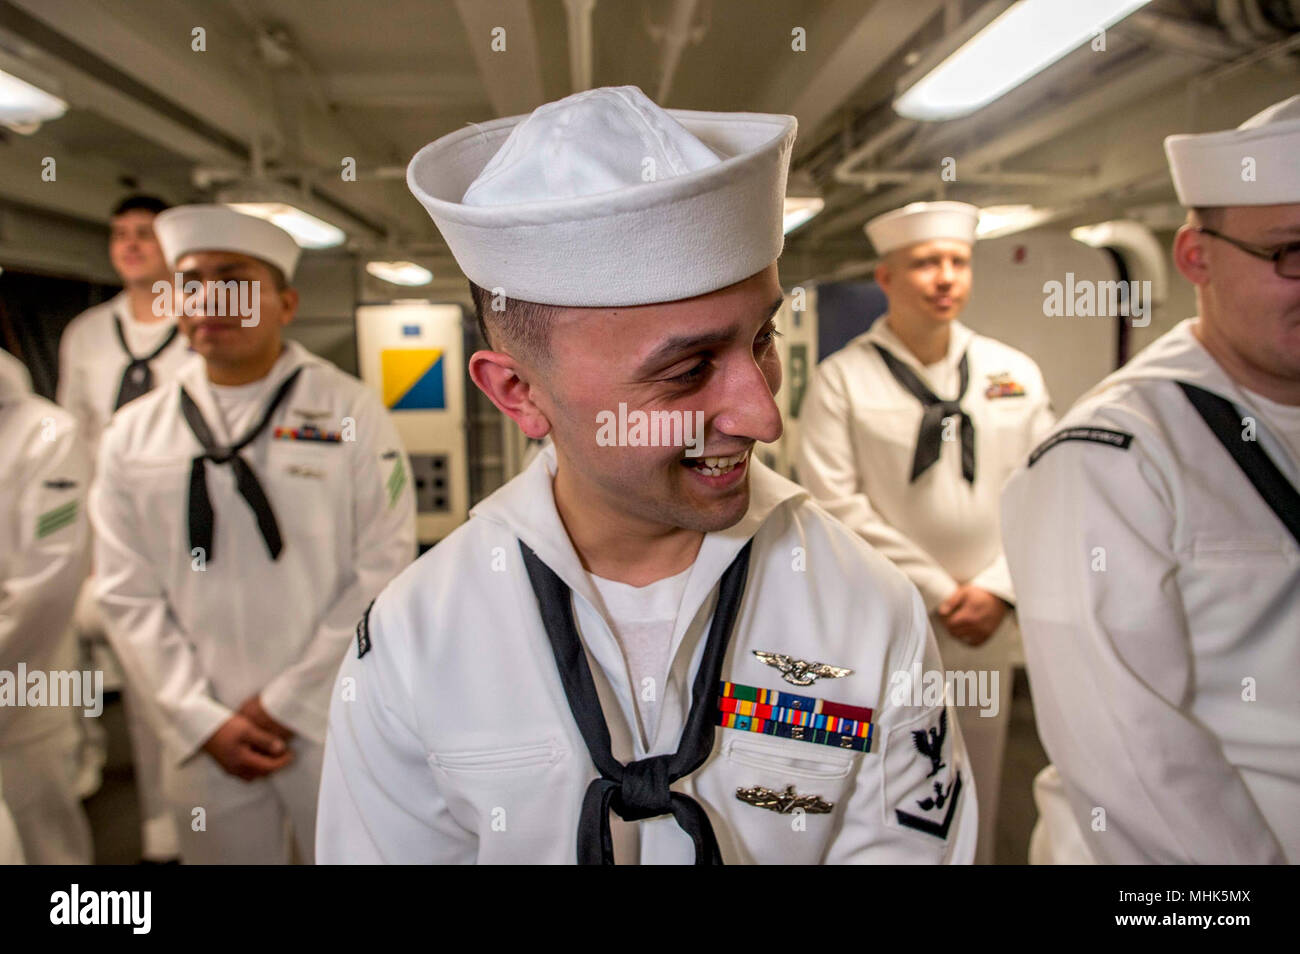 NORFOLK, Va. (March 20, 2018) Aviation Ordnanceman 3rd Class Julio Pino laughs after a service dress white uniform inspection aboard the aircraft carrier USS George H.W. Bush (CVN 77). The ship is in port in Norfolk, Virginia, conducting sustainment exercises to maintain carrier readiness. (U.S. Navy Stock Photo